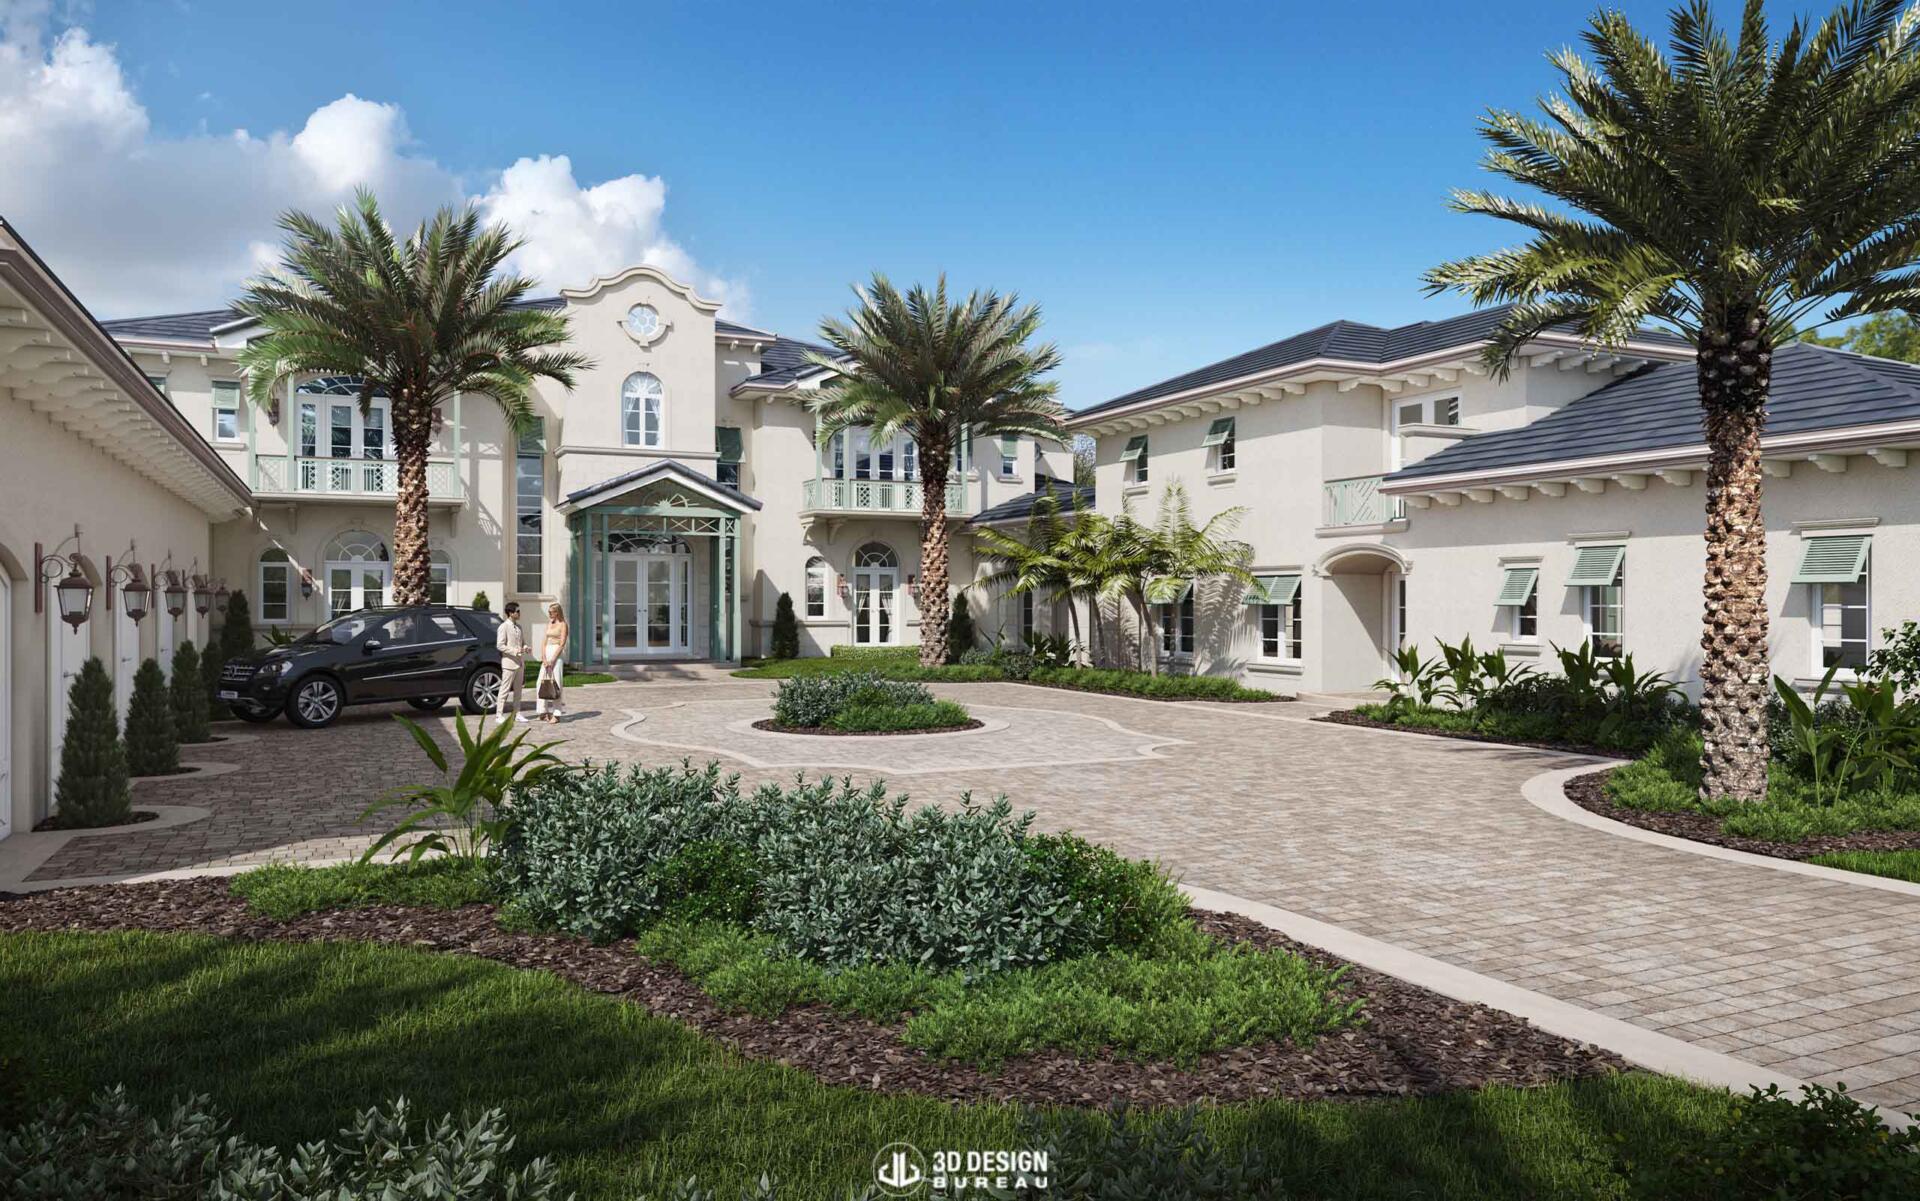 Updated frontal view computer-generated image of the Vero Beach mansion, created in 2023